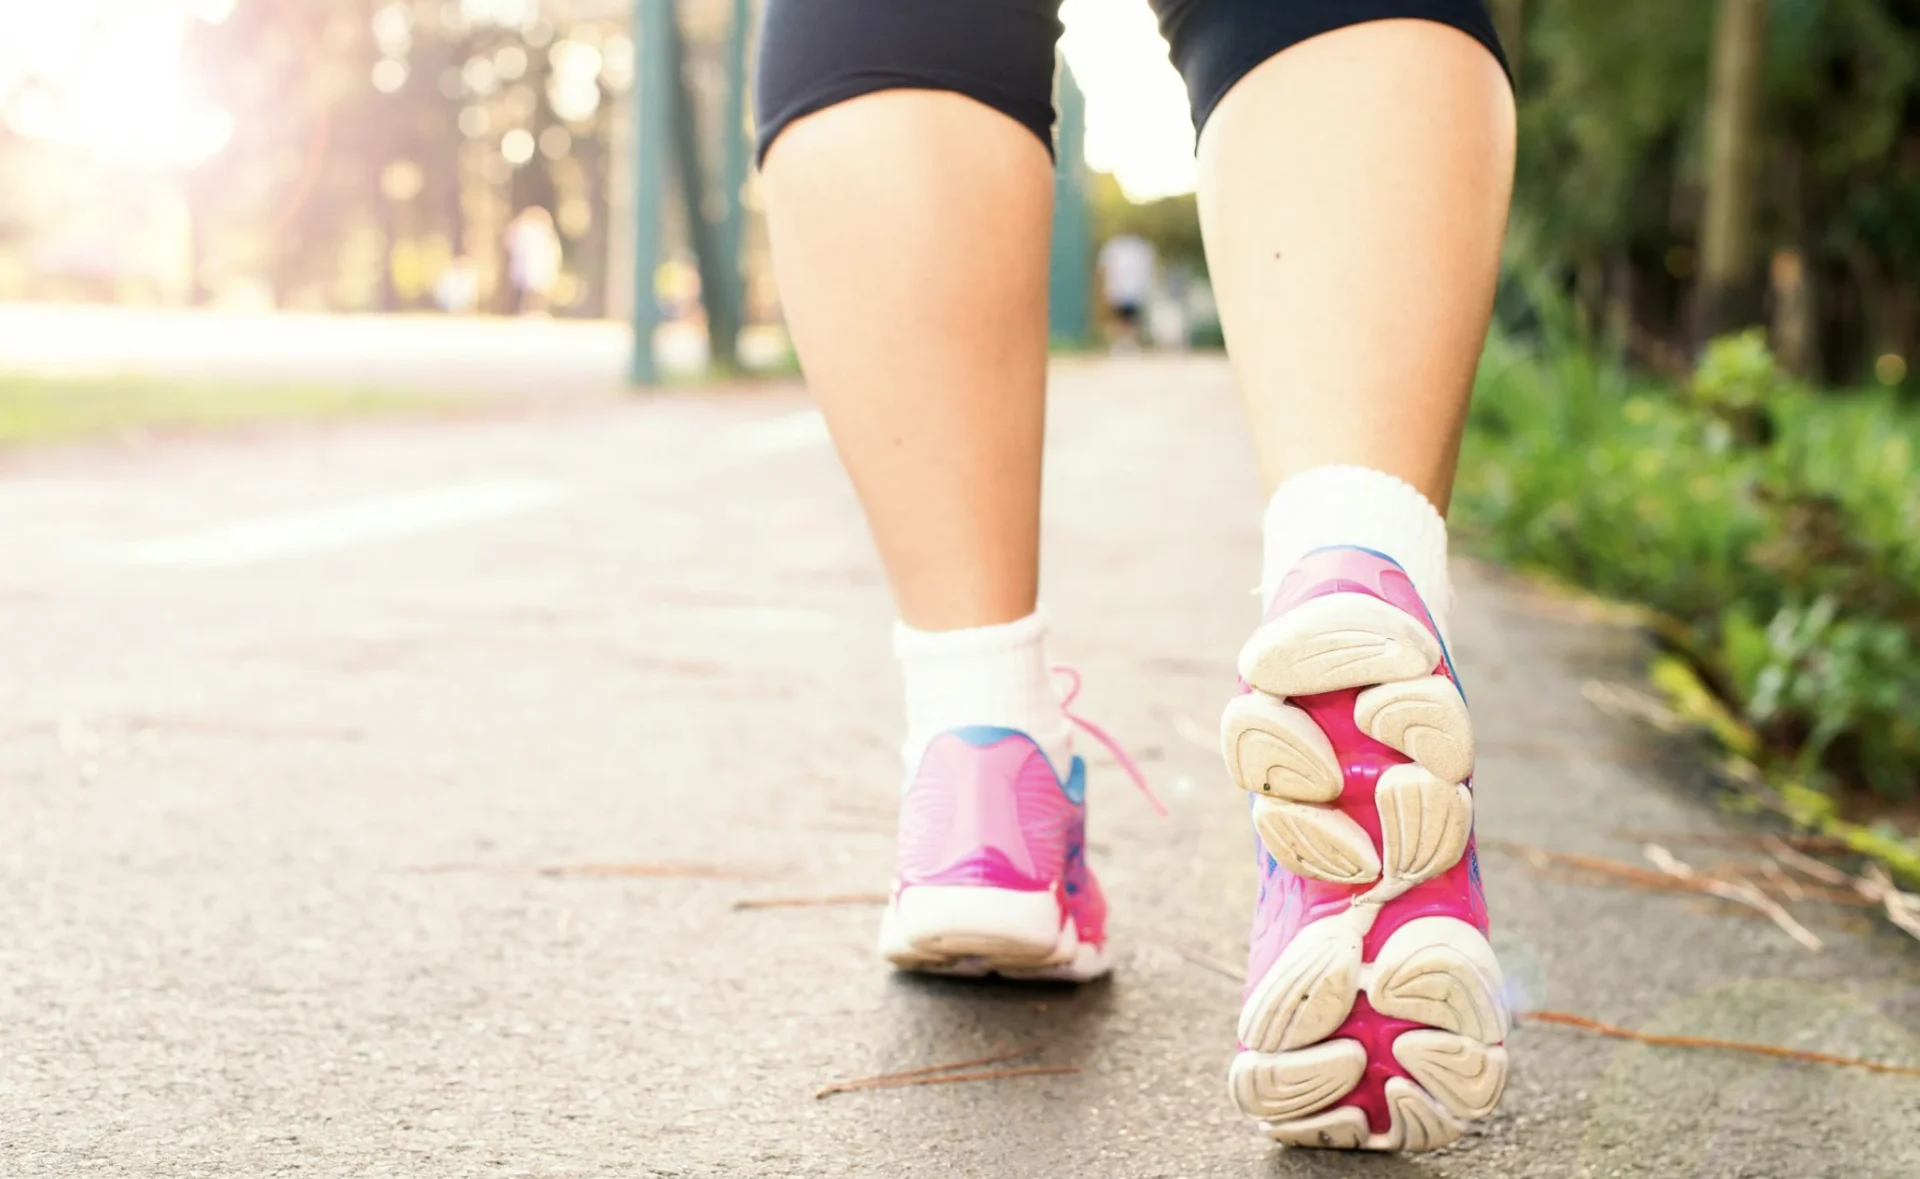 Time to get outside: study finds brisk walking slows biological aging process